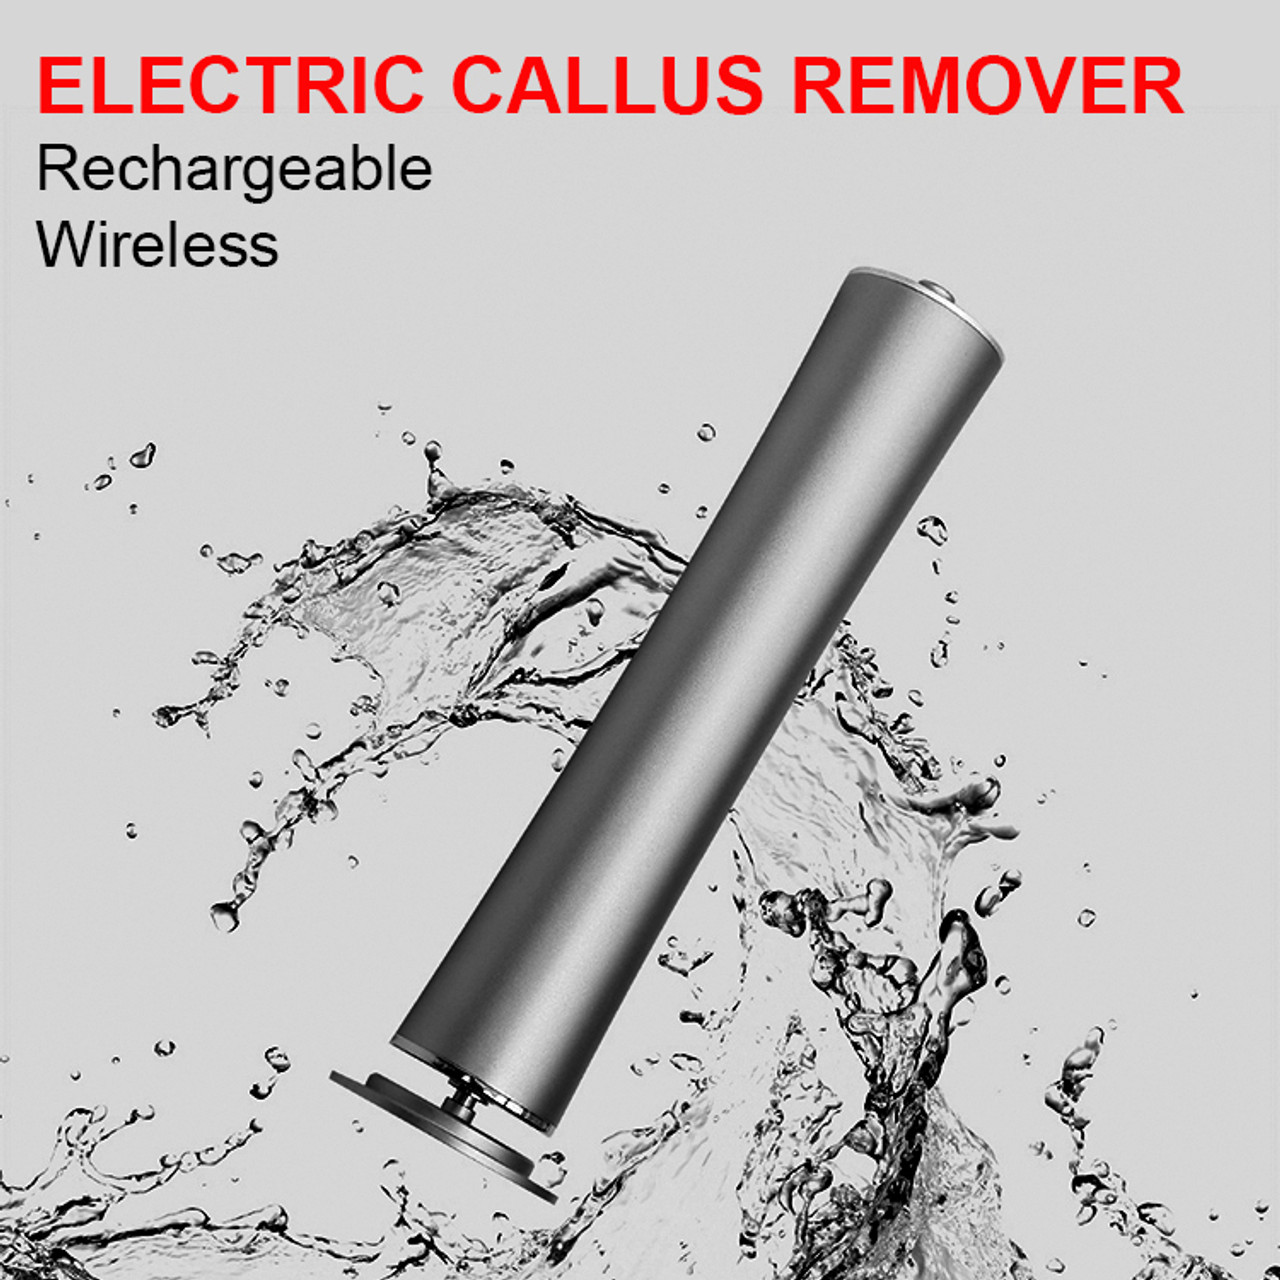 CALLUS REMOVER Electric , Black, Rechargeable. - TDI, Inc